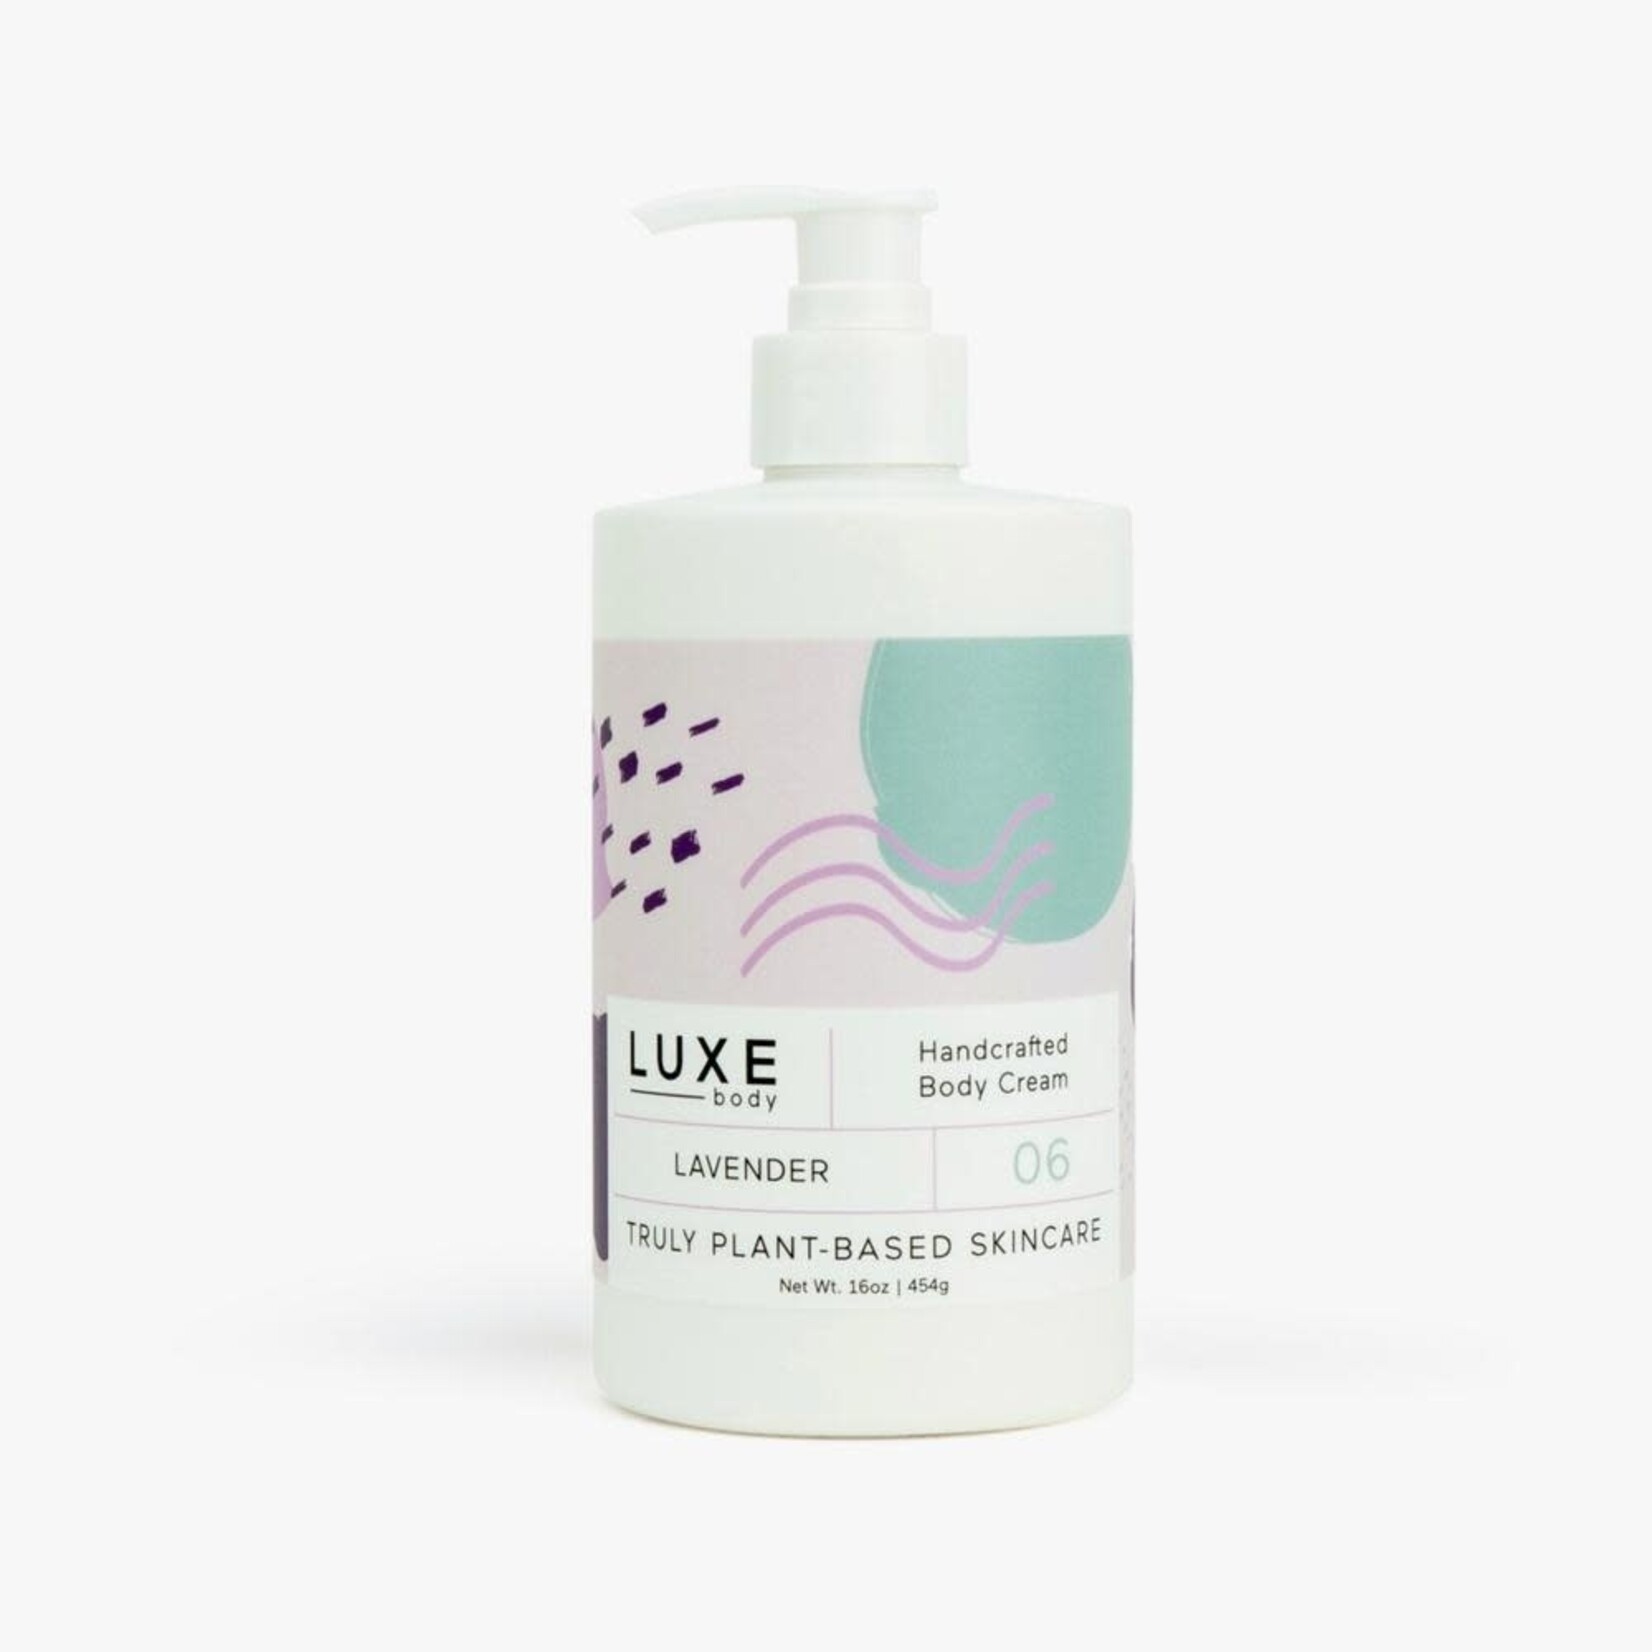 Luxe Apothecary Luxe Apothecary Handcrafted Body Cream